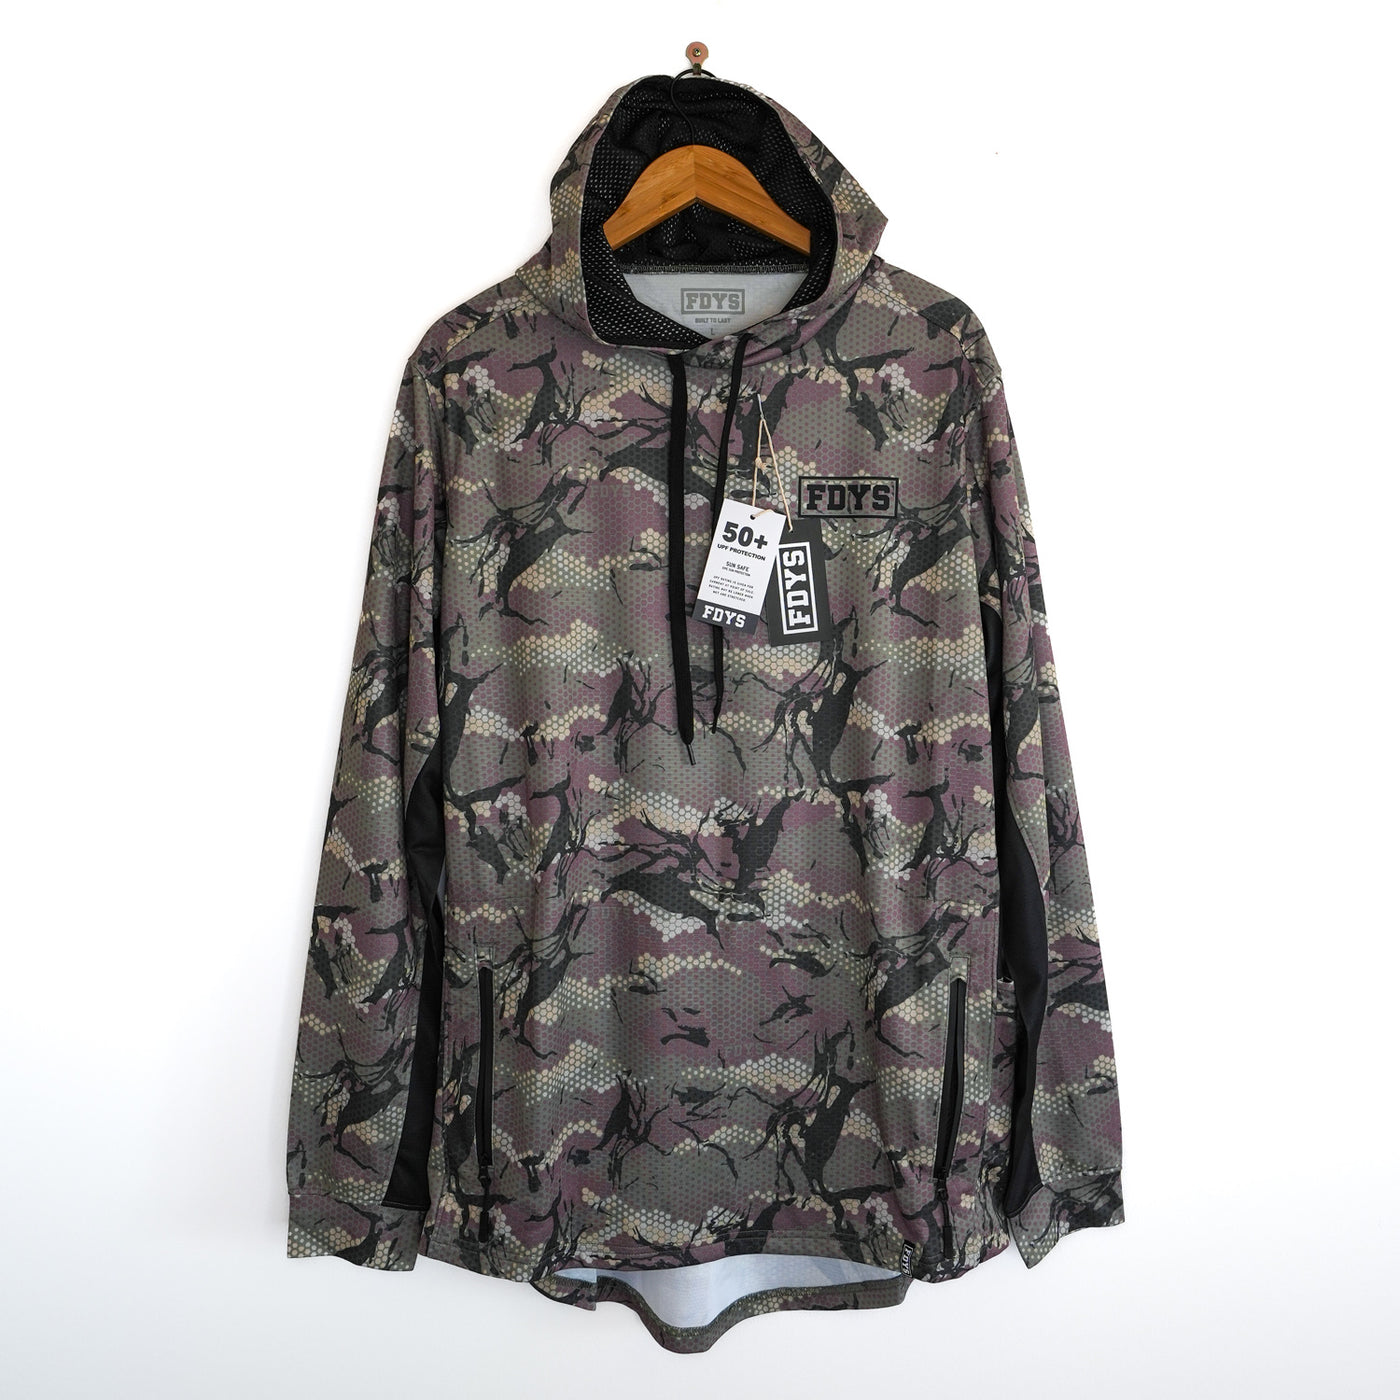 Savage Elements Hooded Fishing Jersey - Army Camo – Field Days